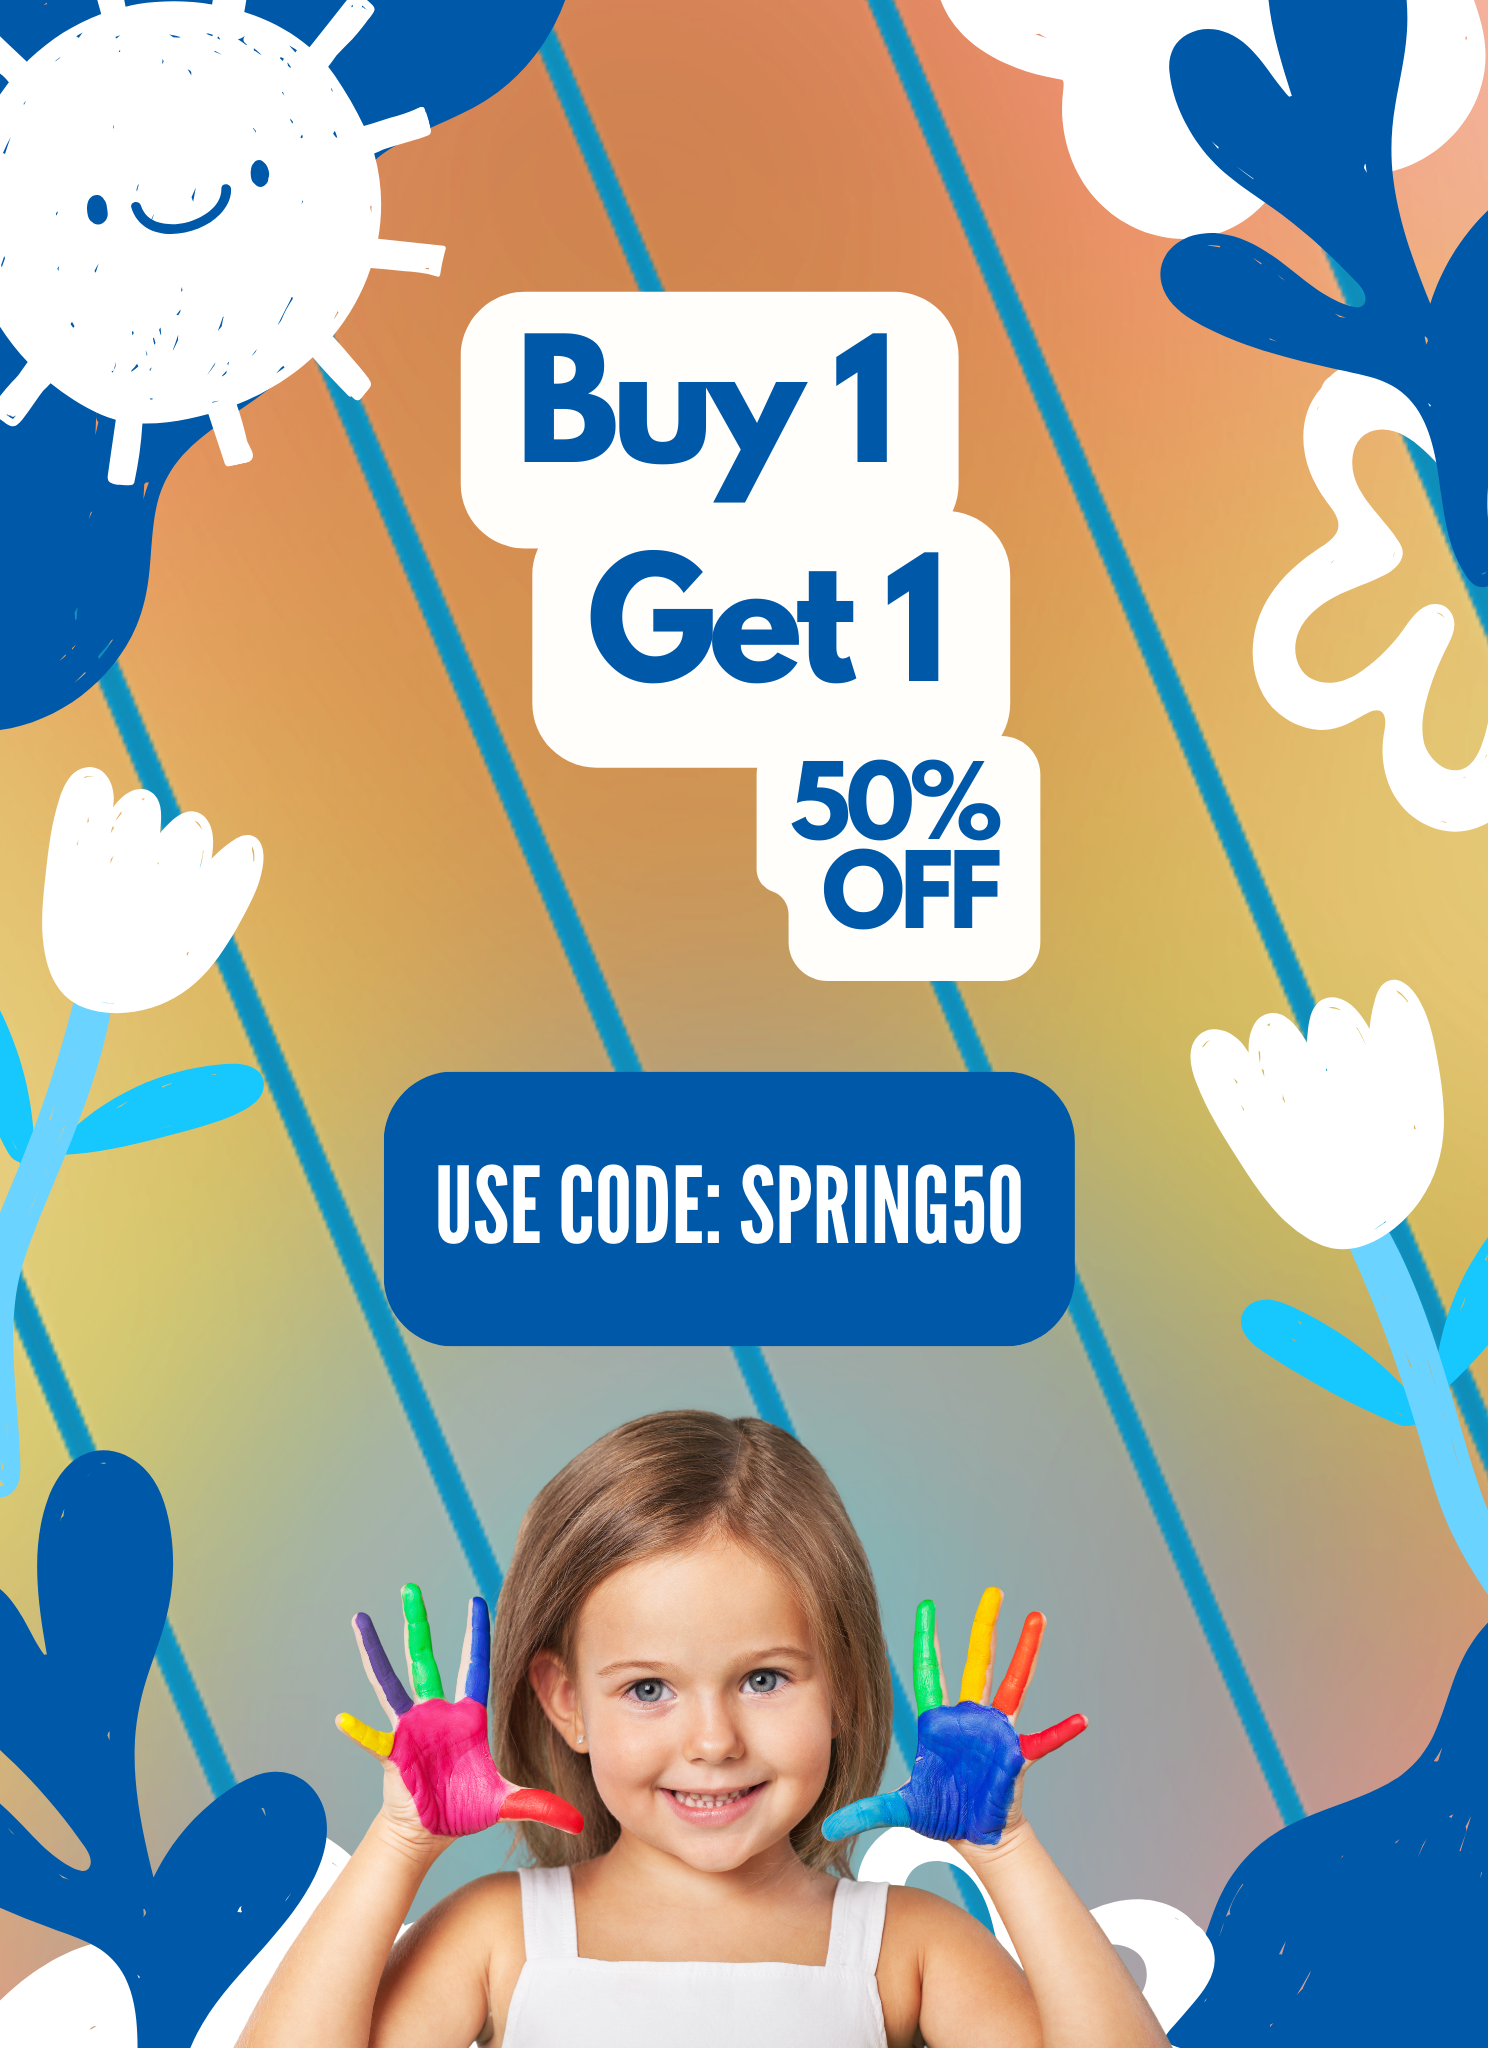 A cheerful young girl with colorful paint on her hands smiles in front of a promotional poster for montessori toys for 2 year olds that reads "buy 1 get 1 50% off